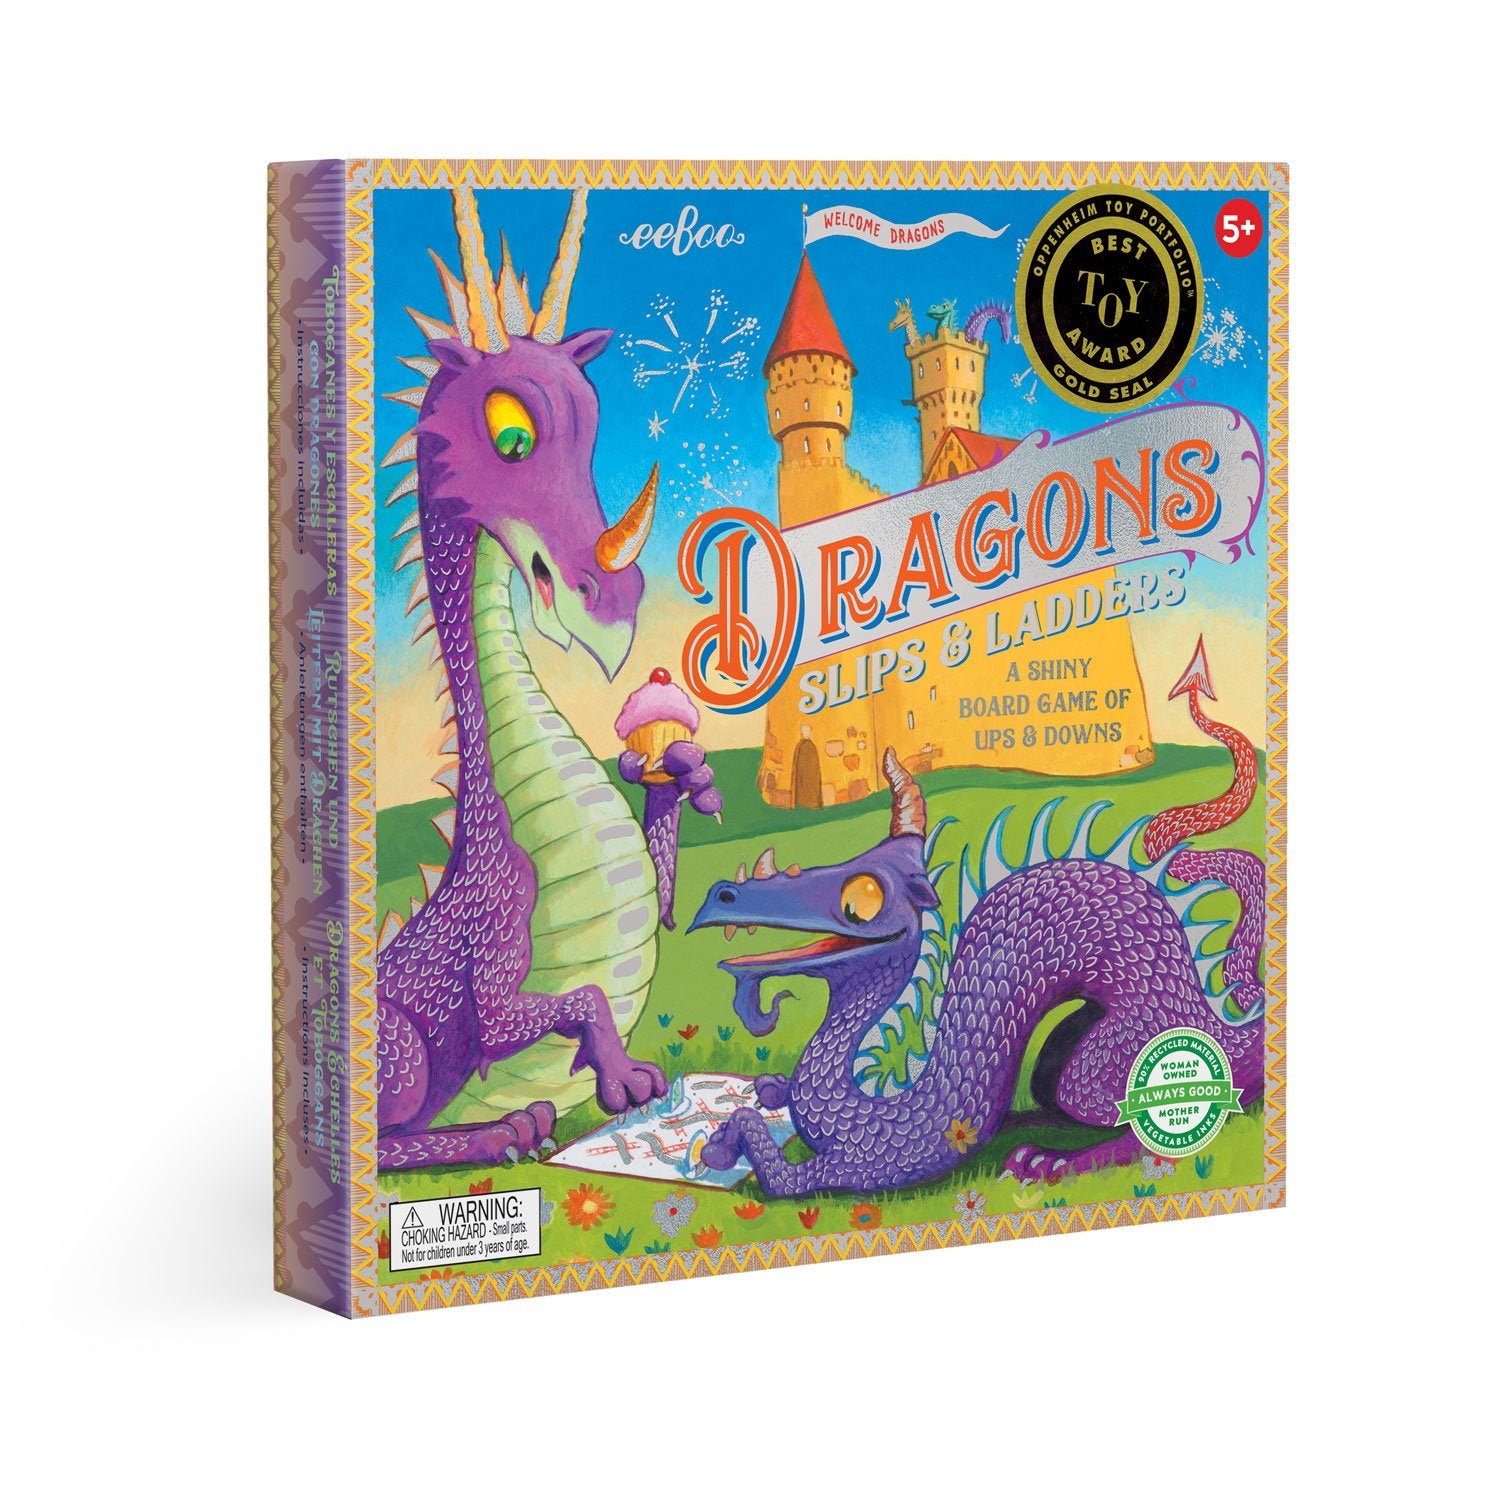 eeBoo Game Dragons Slips & Ladders The Toy Wagon